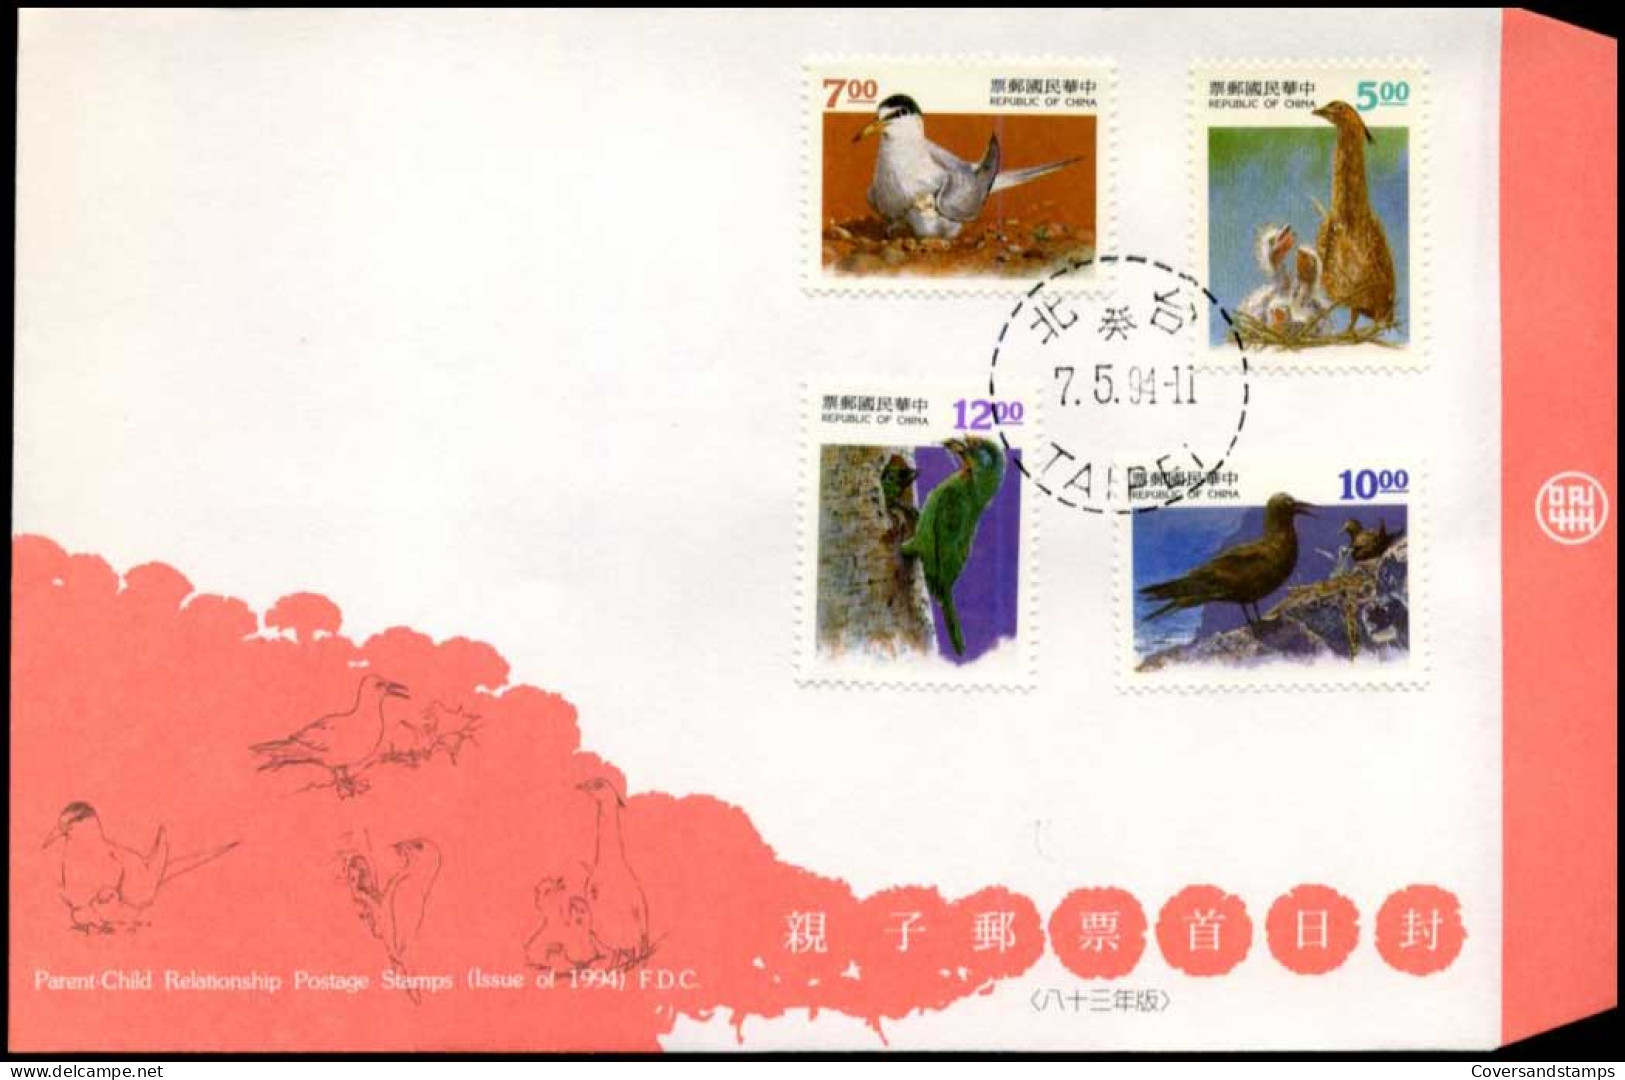 Taiwan - FDC - Parent-child Relationship Postage Stamps - FDC